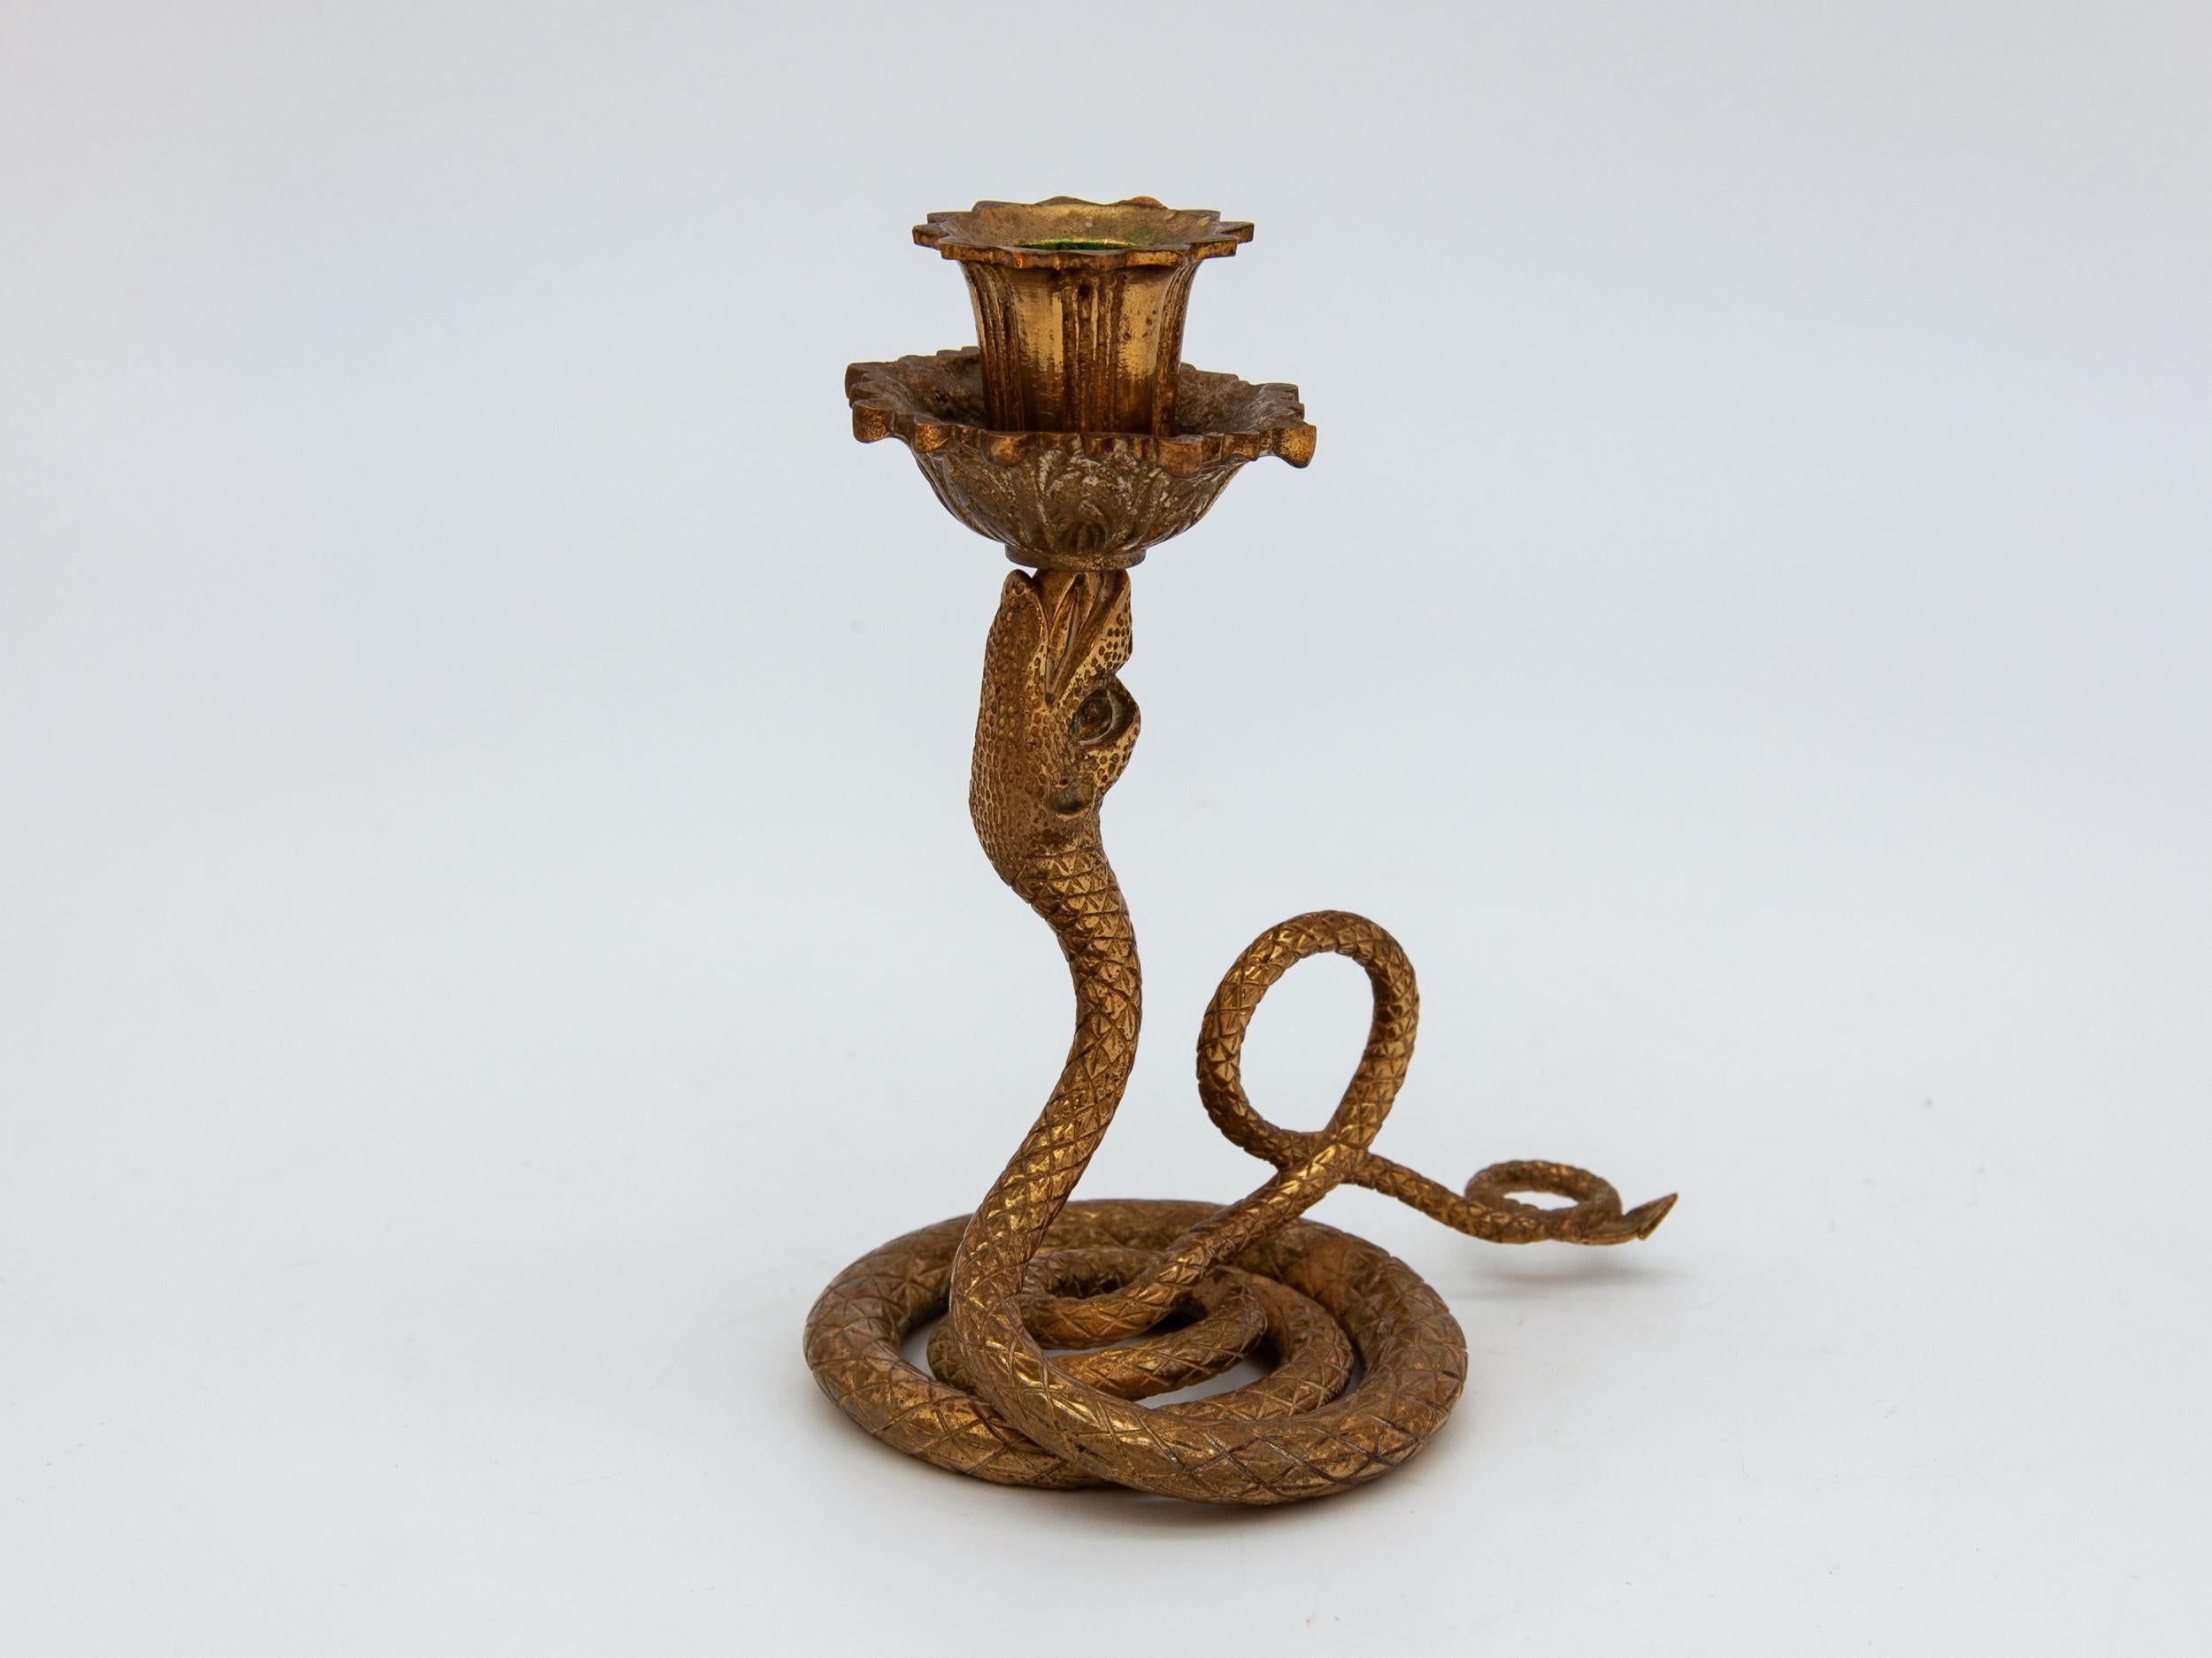 Single brass candle holder in the shape of a coiled snake. Open mouth holds the base of the candle holder. The patina highlights the crosshatch pattern on the snake, tapering to an end with pointed arrow fins.